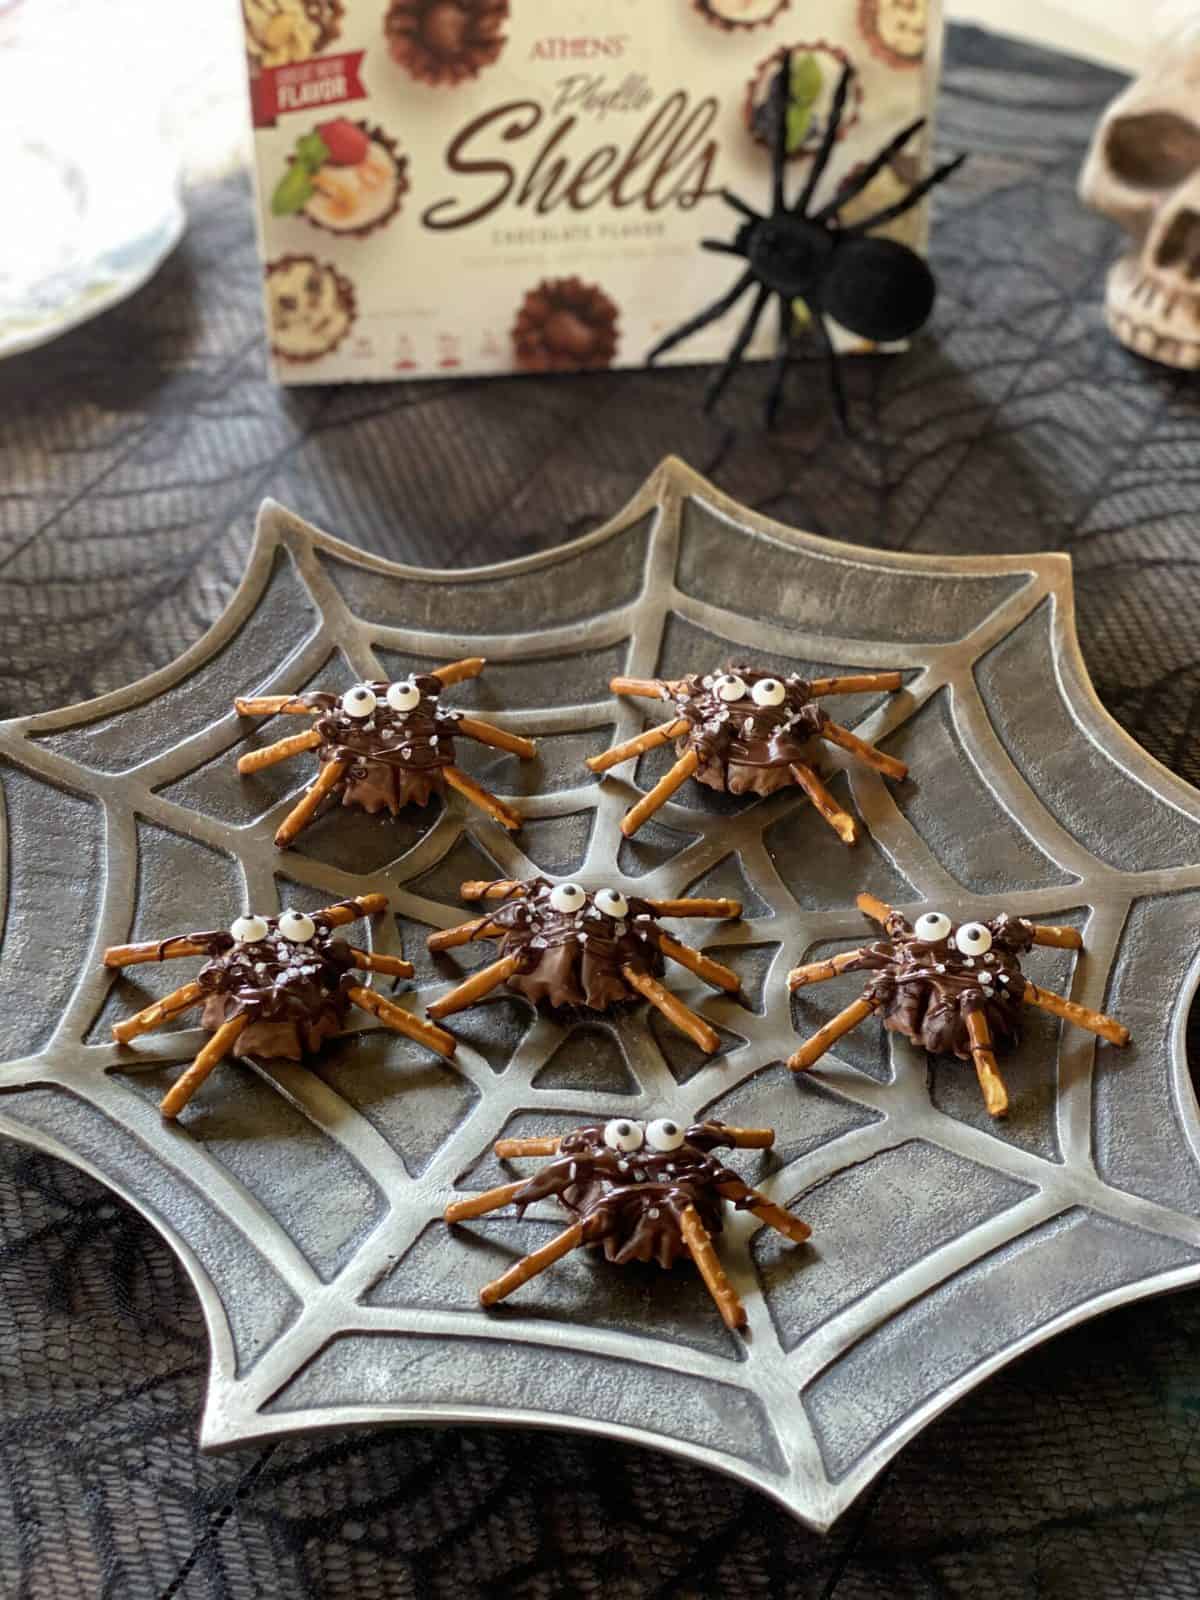 Edible spiders on a plate with chocolate bodies and pretzel legs.